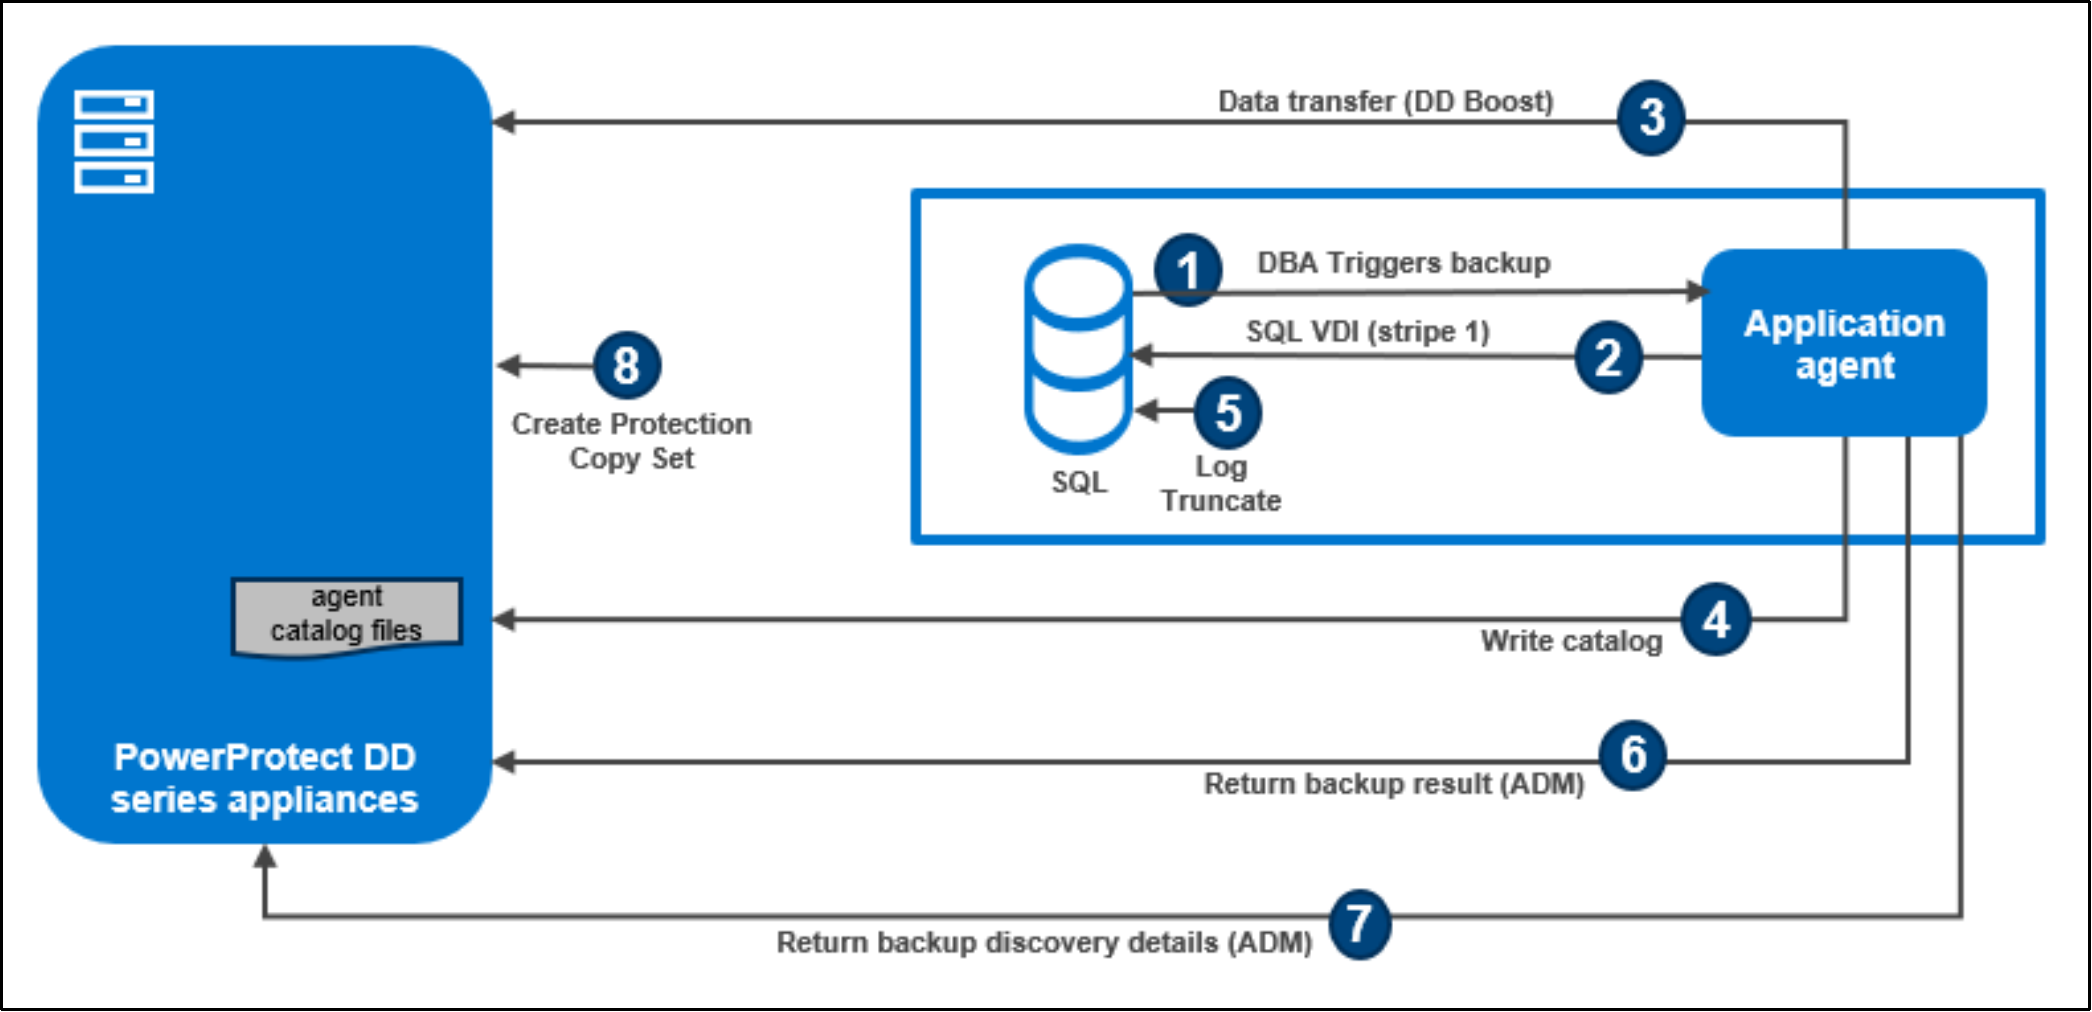 The image shows the Self-service Application Direct backup workflow (LOG)